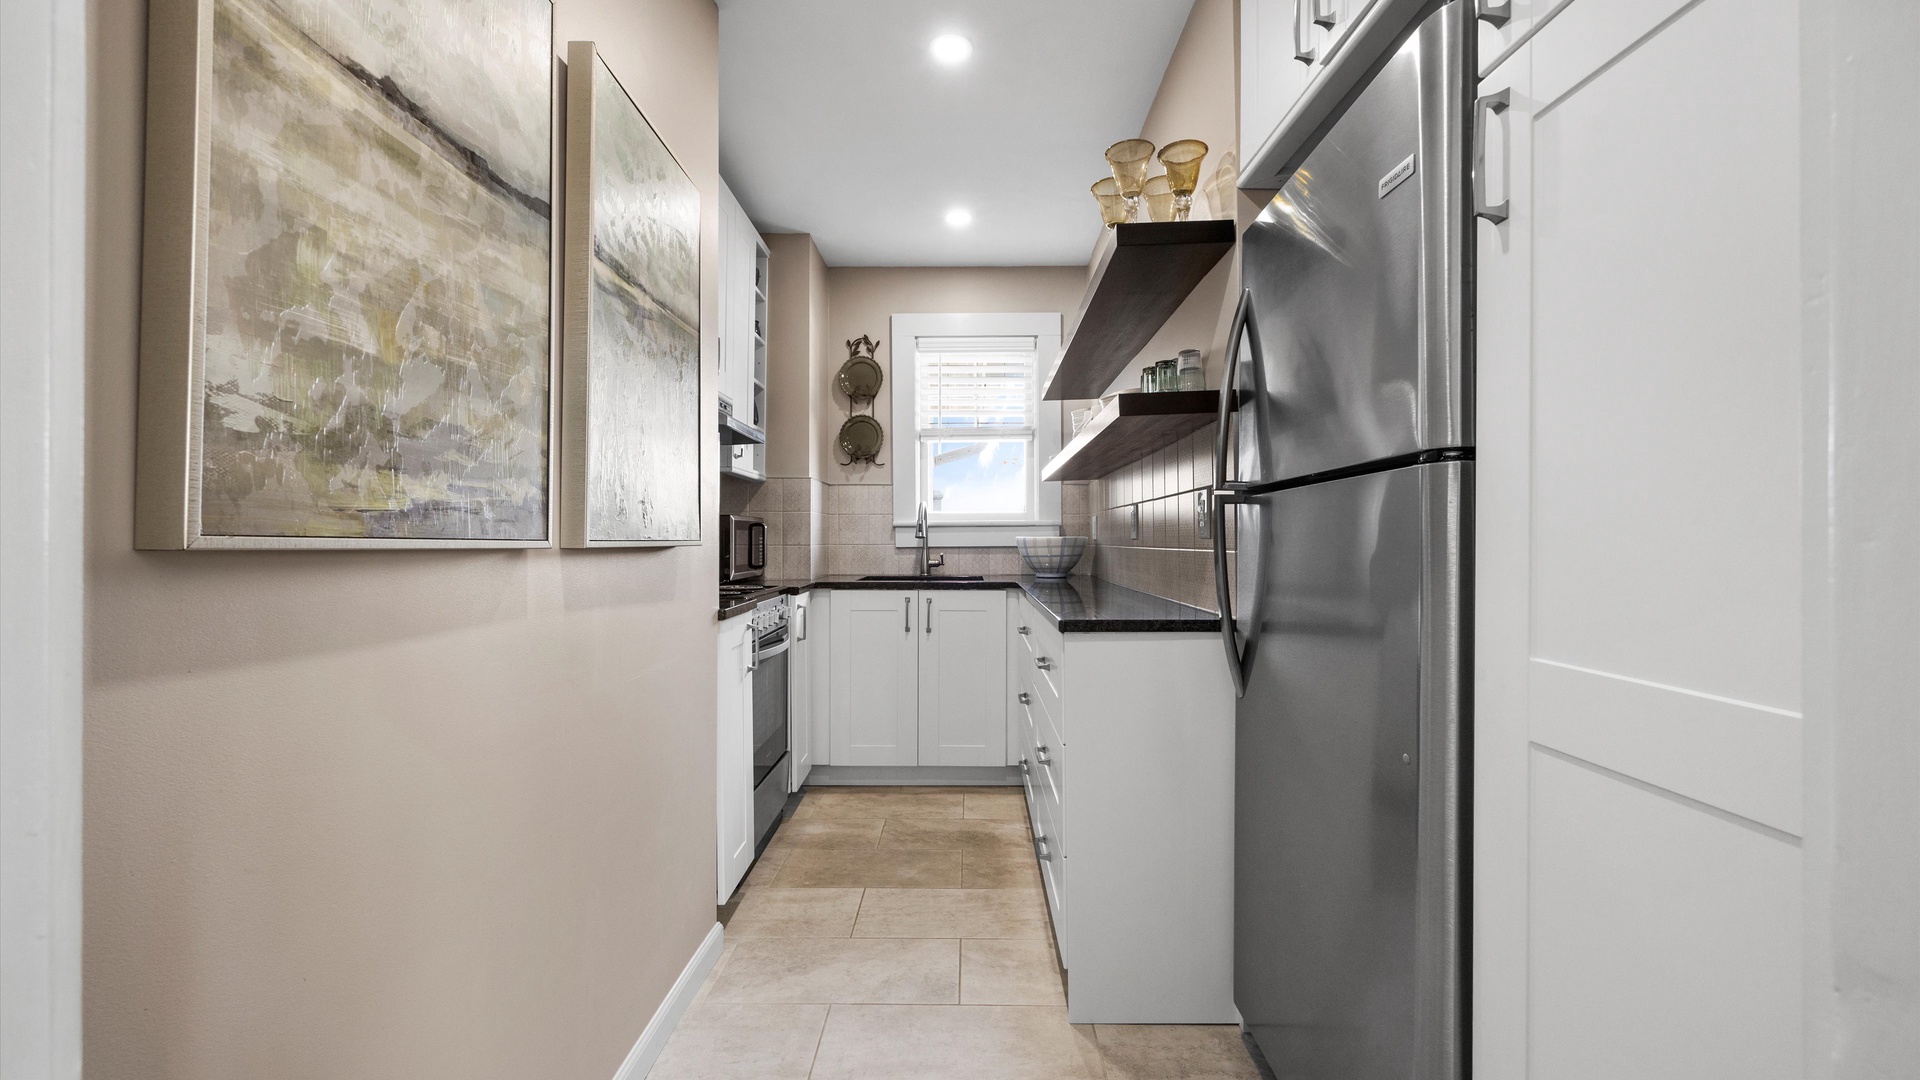 The cozy kitchen offers ample storage space & all the comforts of home